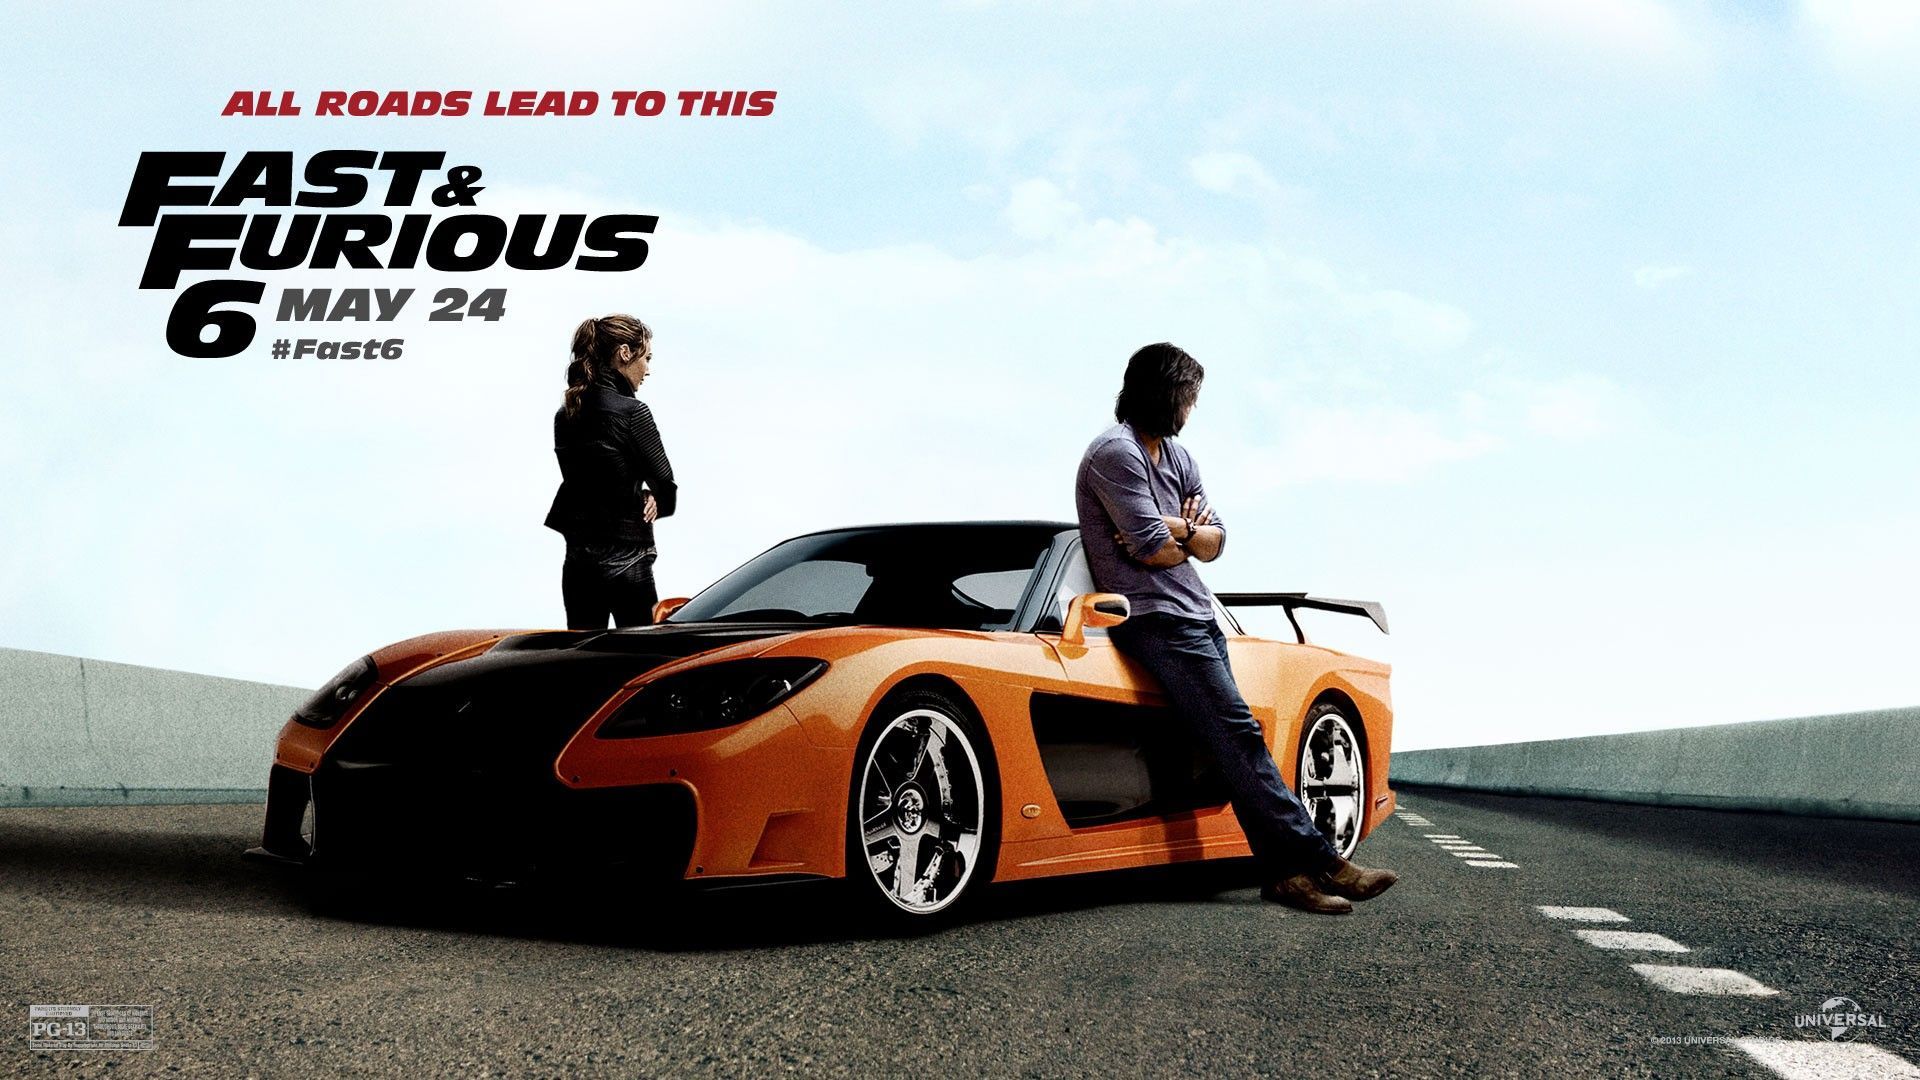 Fast And Furious All Roads Leads To in Movies.com. Fast and furious, Sung kang, Furious 6